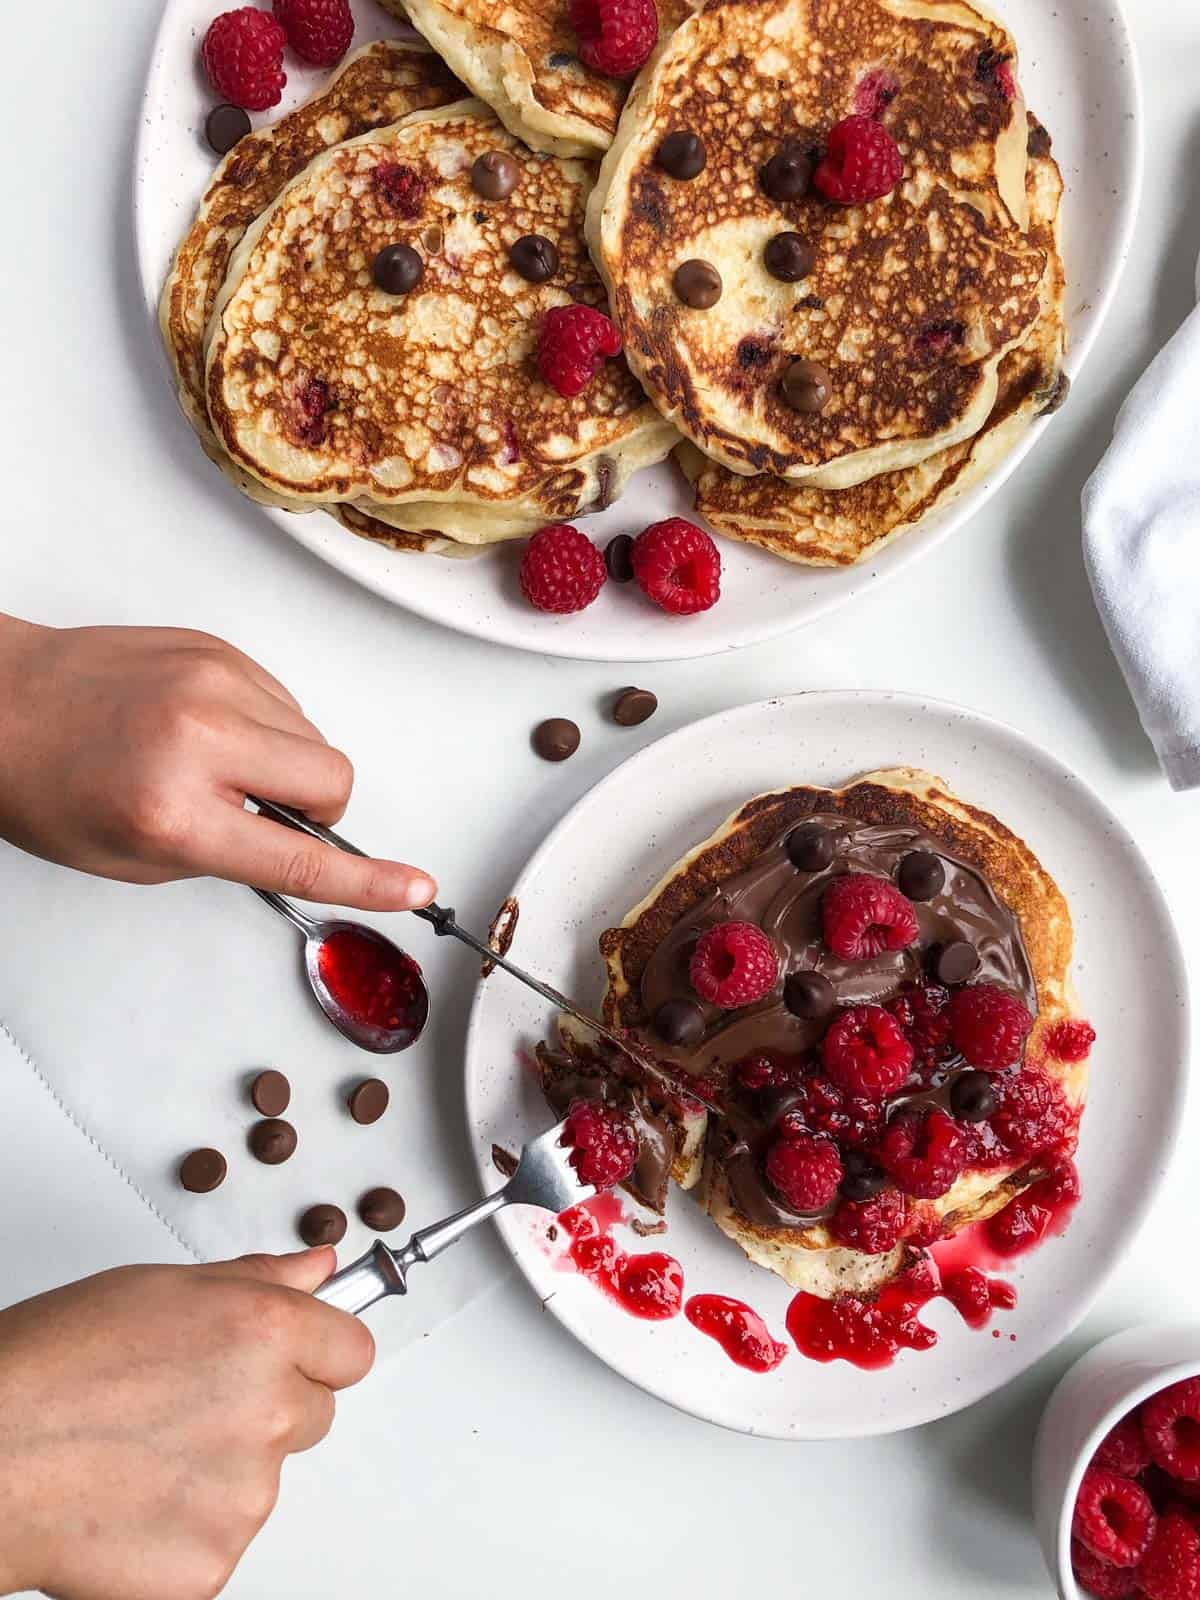 Hands holding cuttlery, cutting pancake topped with chocolate, raspberries and chocolate chips.